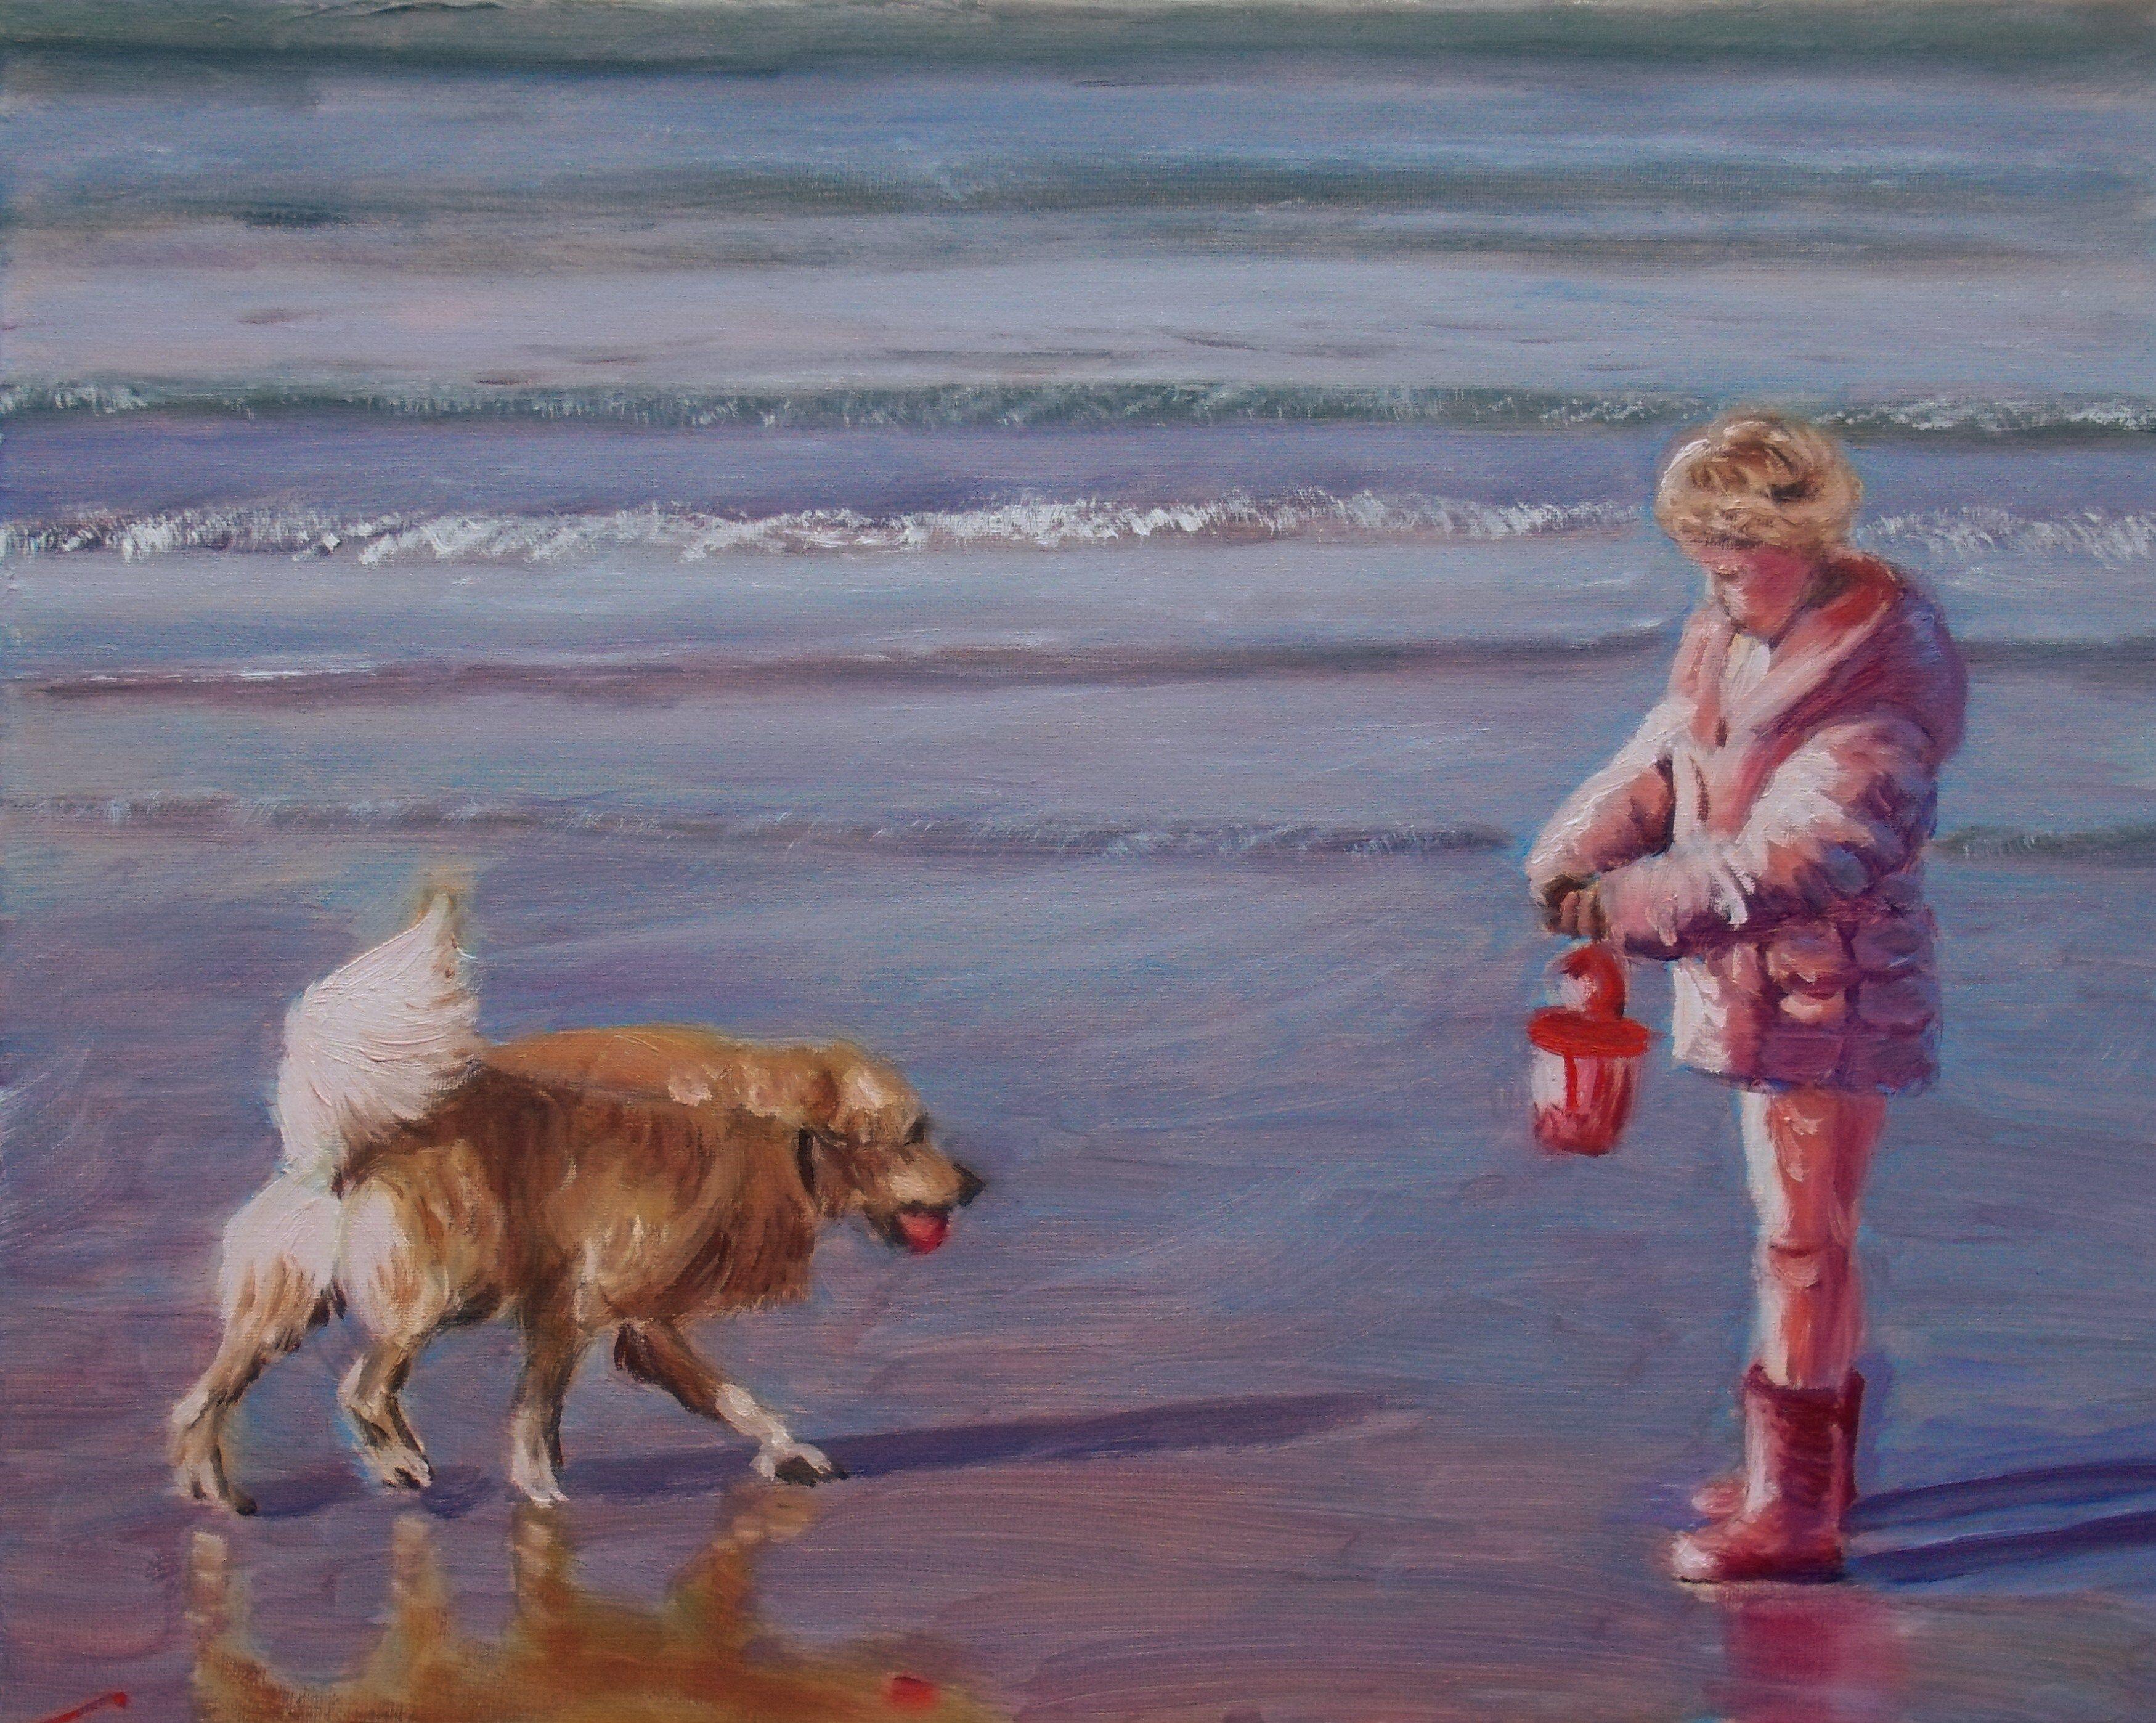 Girl and a dog at the sea. Alla prima oil painting with few final tuch when dry.Water right by the edge of the shore. Waves crashing at my feet. Beautiful weather with a big shining sun. And I'm standing there taking it all in. Water right by the